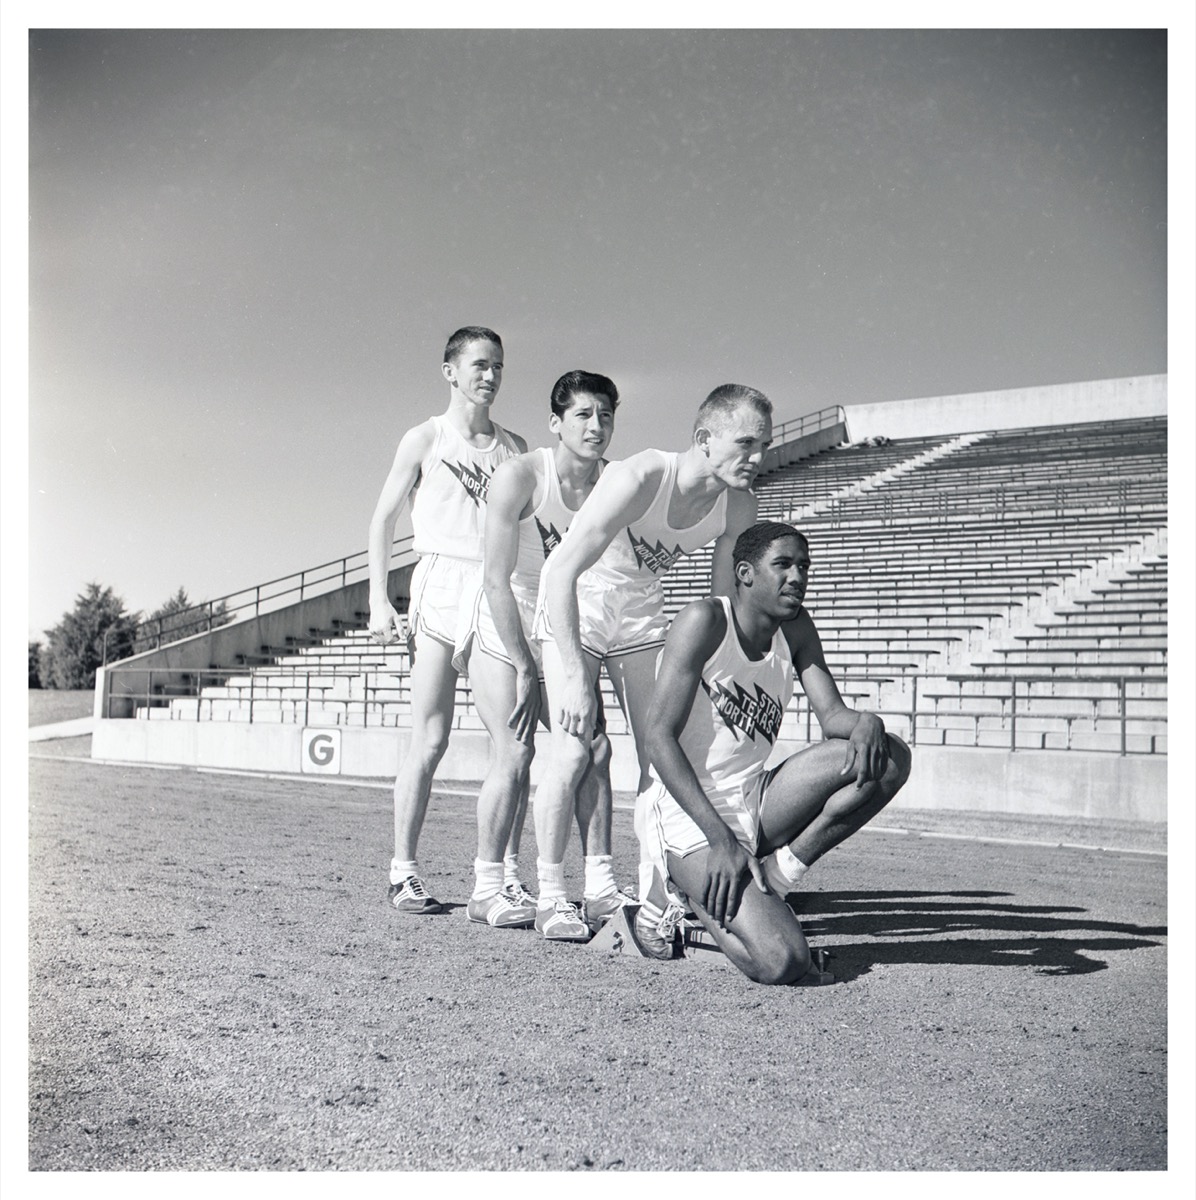 Black and white photo where 4 men pose in line behind each other. They all wear the same white shorts and tank top. The bleachers are seen behind them.